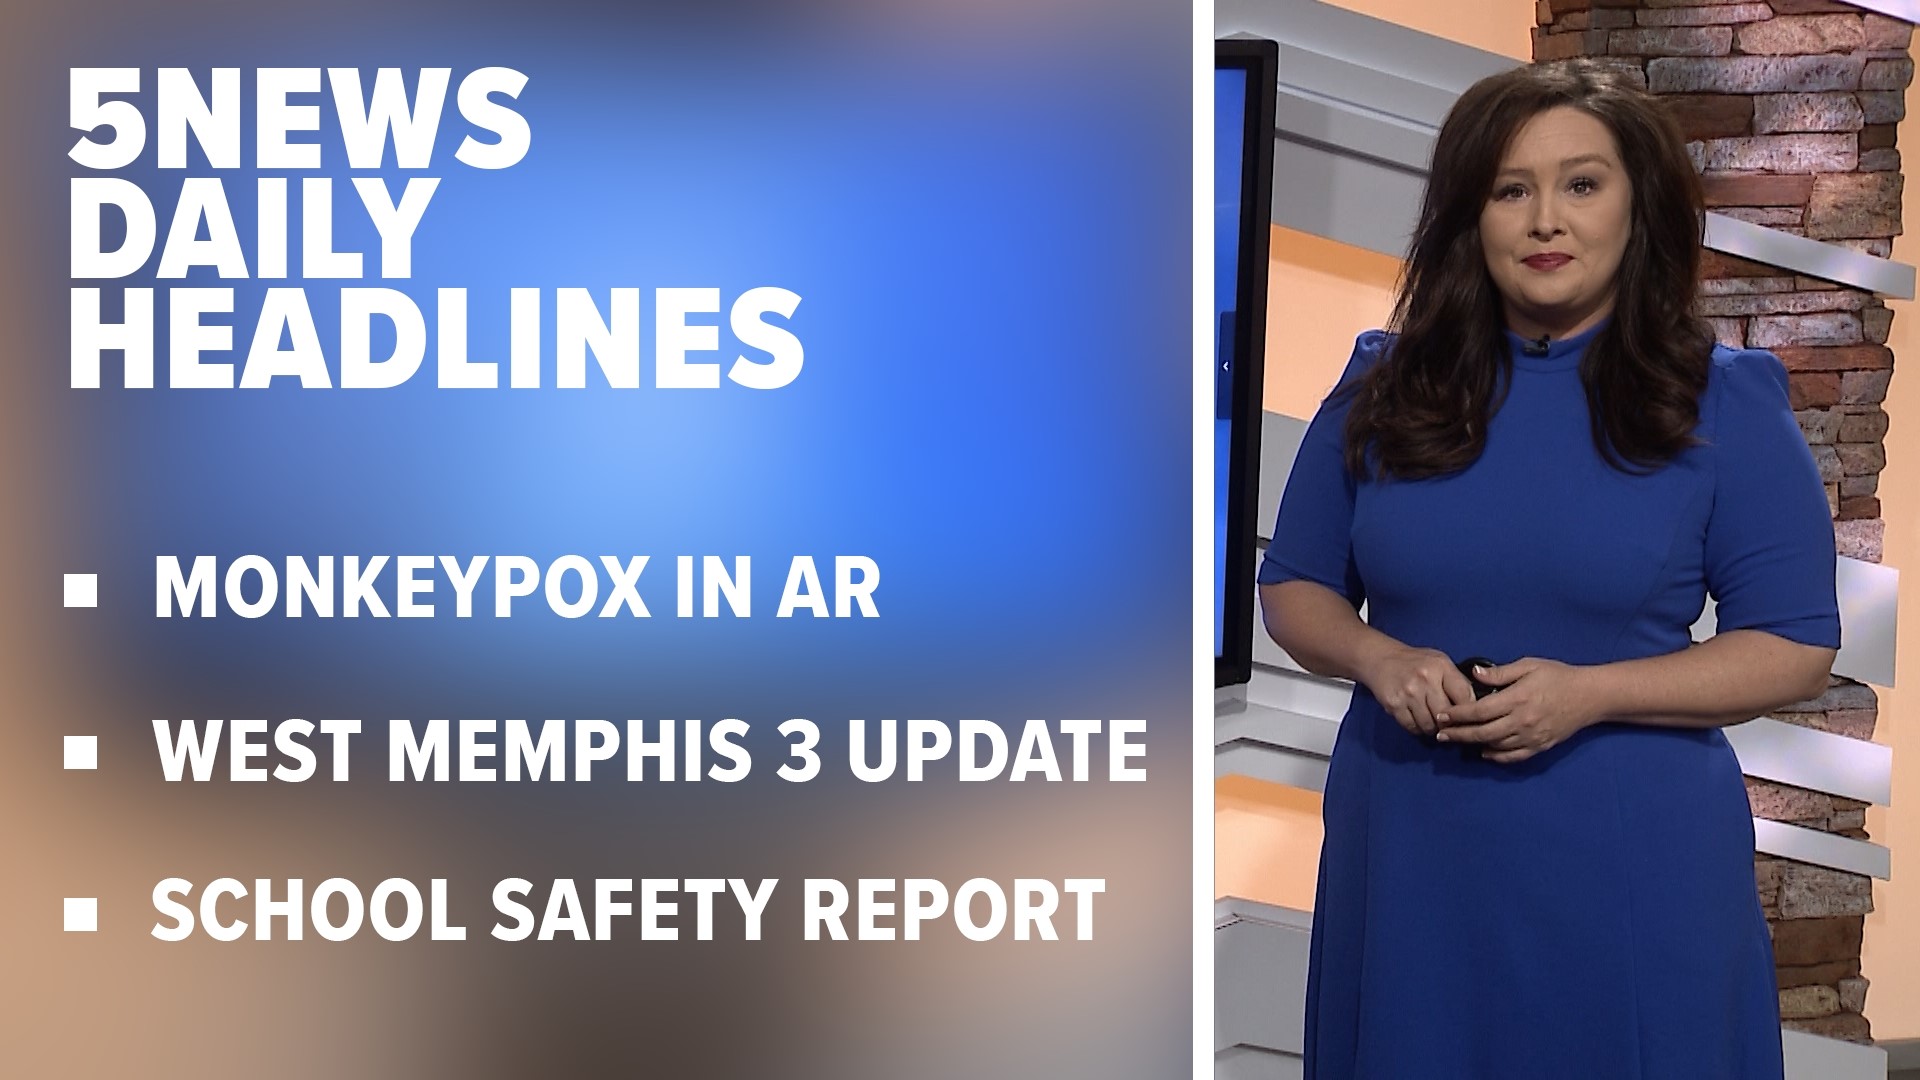 Monkeypox in Arkansas, West Memphis 3 appeals DNA ruling, tax free weekend in Arkansas and Oklahoma | Daily headlines for August 3, 2022